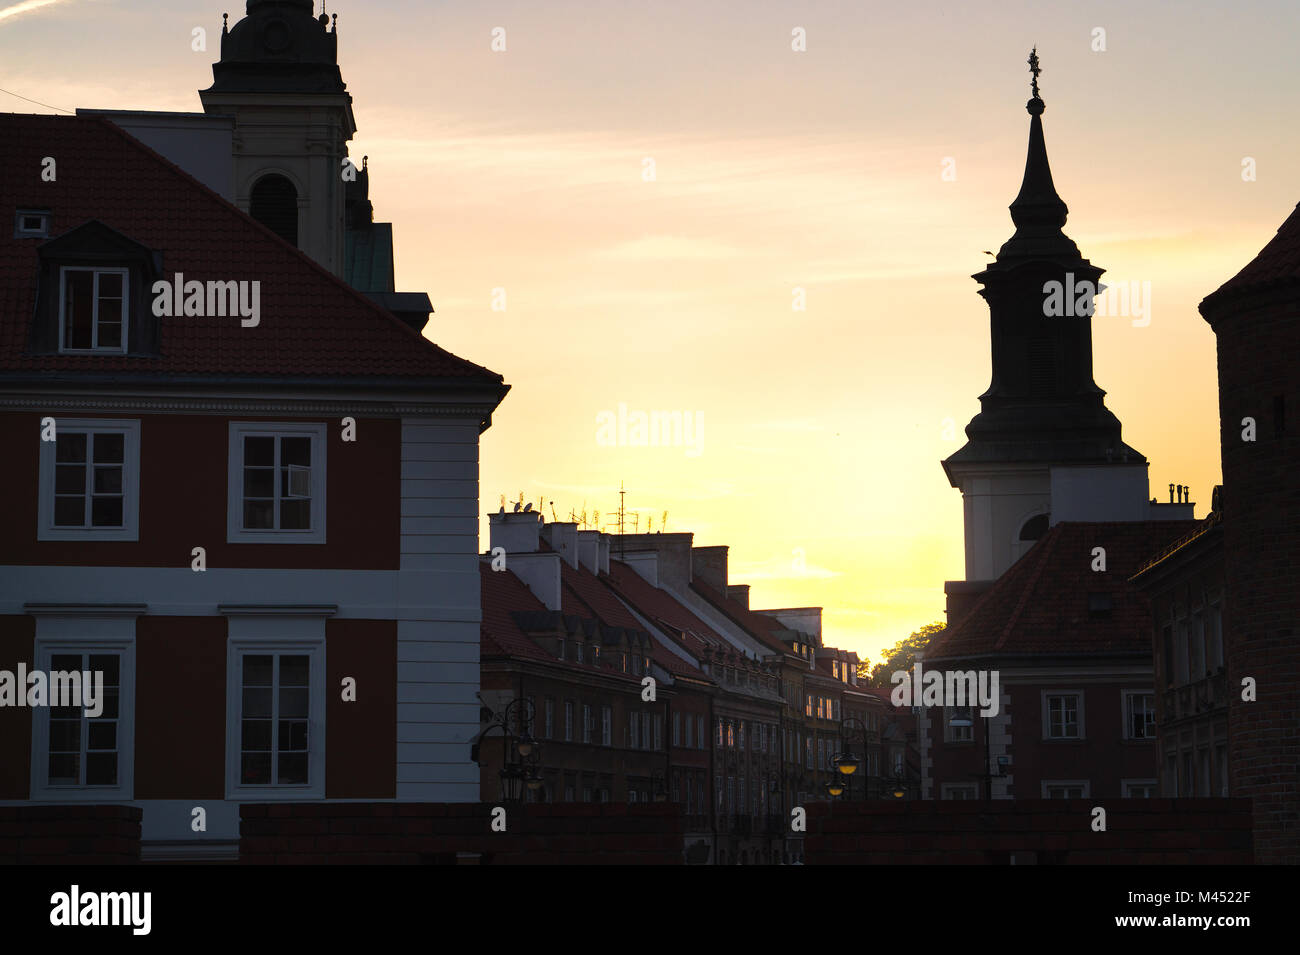 Sunset or sunrise in old town of Warsaw, Poland. Old buildings in dark shadow, almost silhouette. Beautiful yellow orange sky. Stock Photo